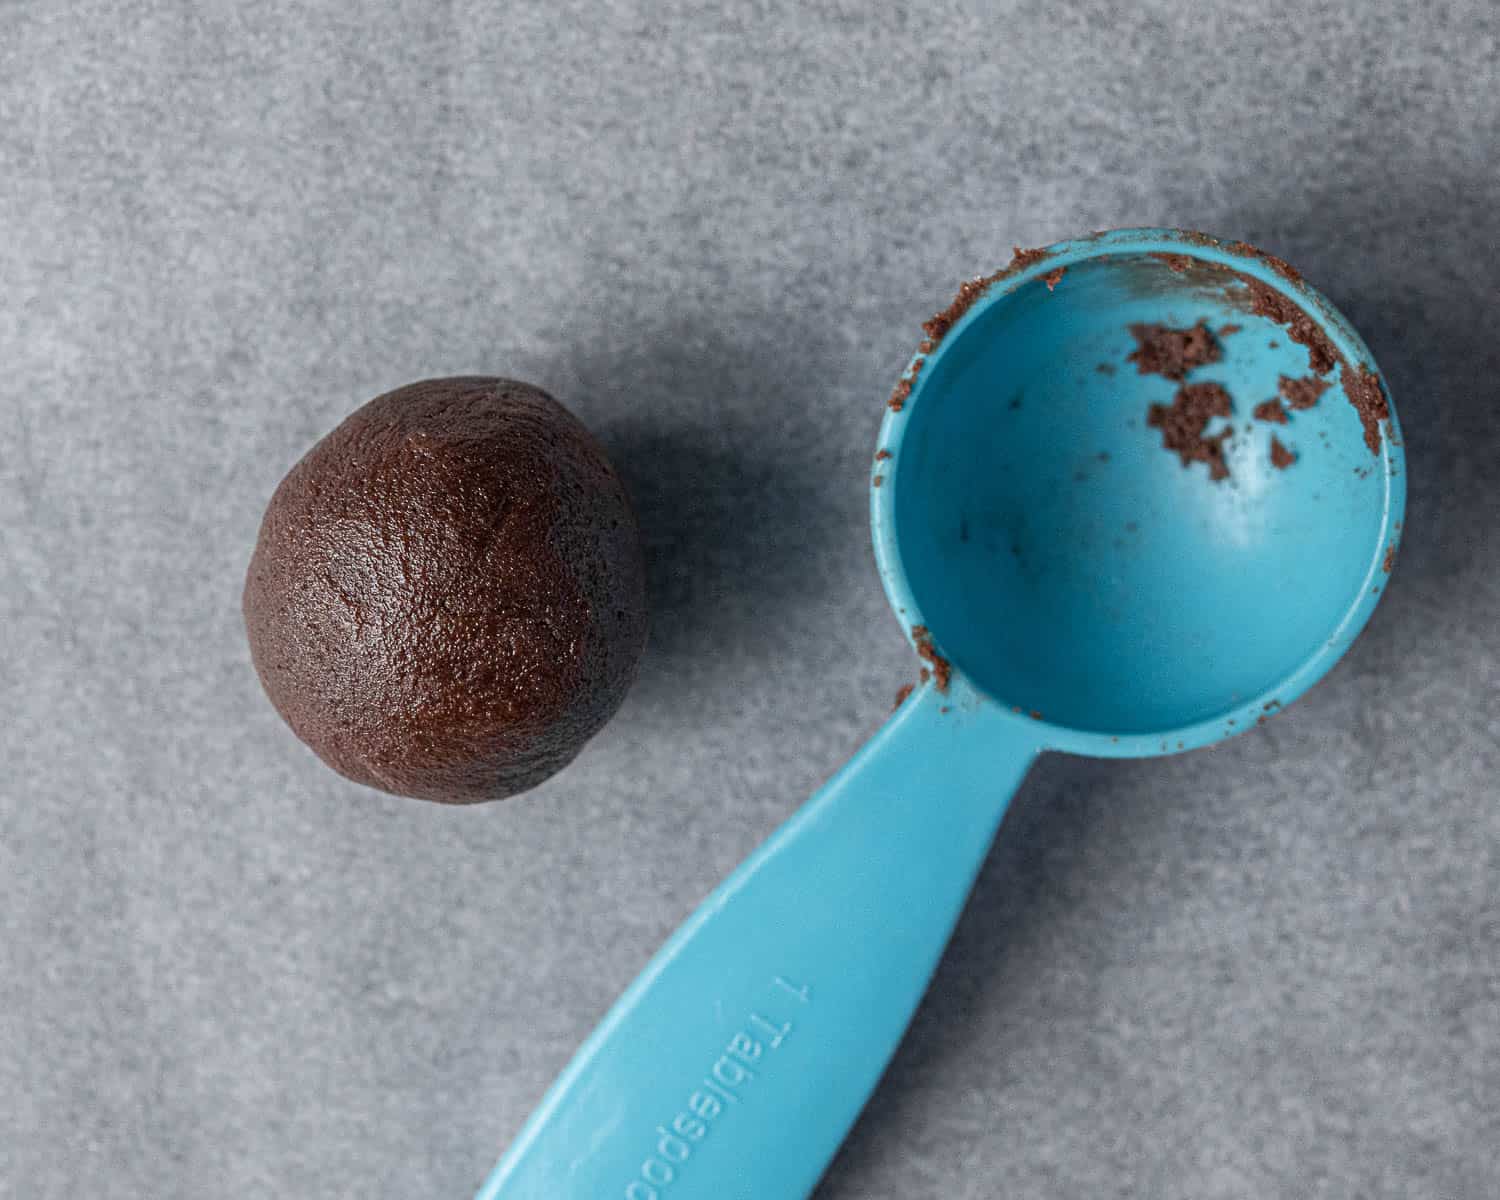 A ball of cookie dough with a tablespoon measure.